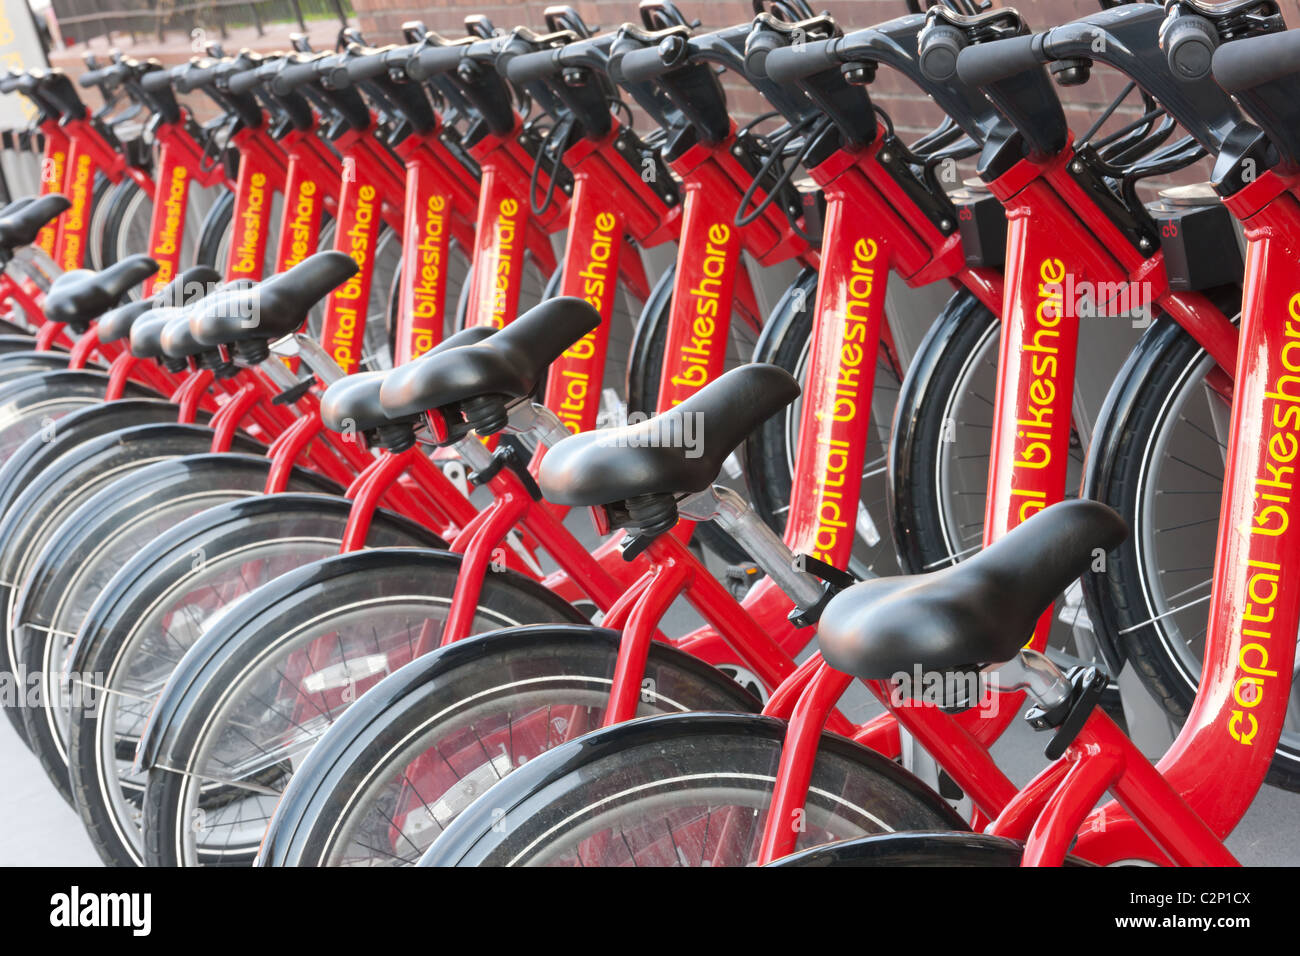 Public bicycles of the Capital Bikeshare bike sharing program docked in a docking station on a street in Washington, DC. Stock Photo